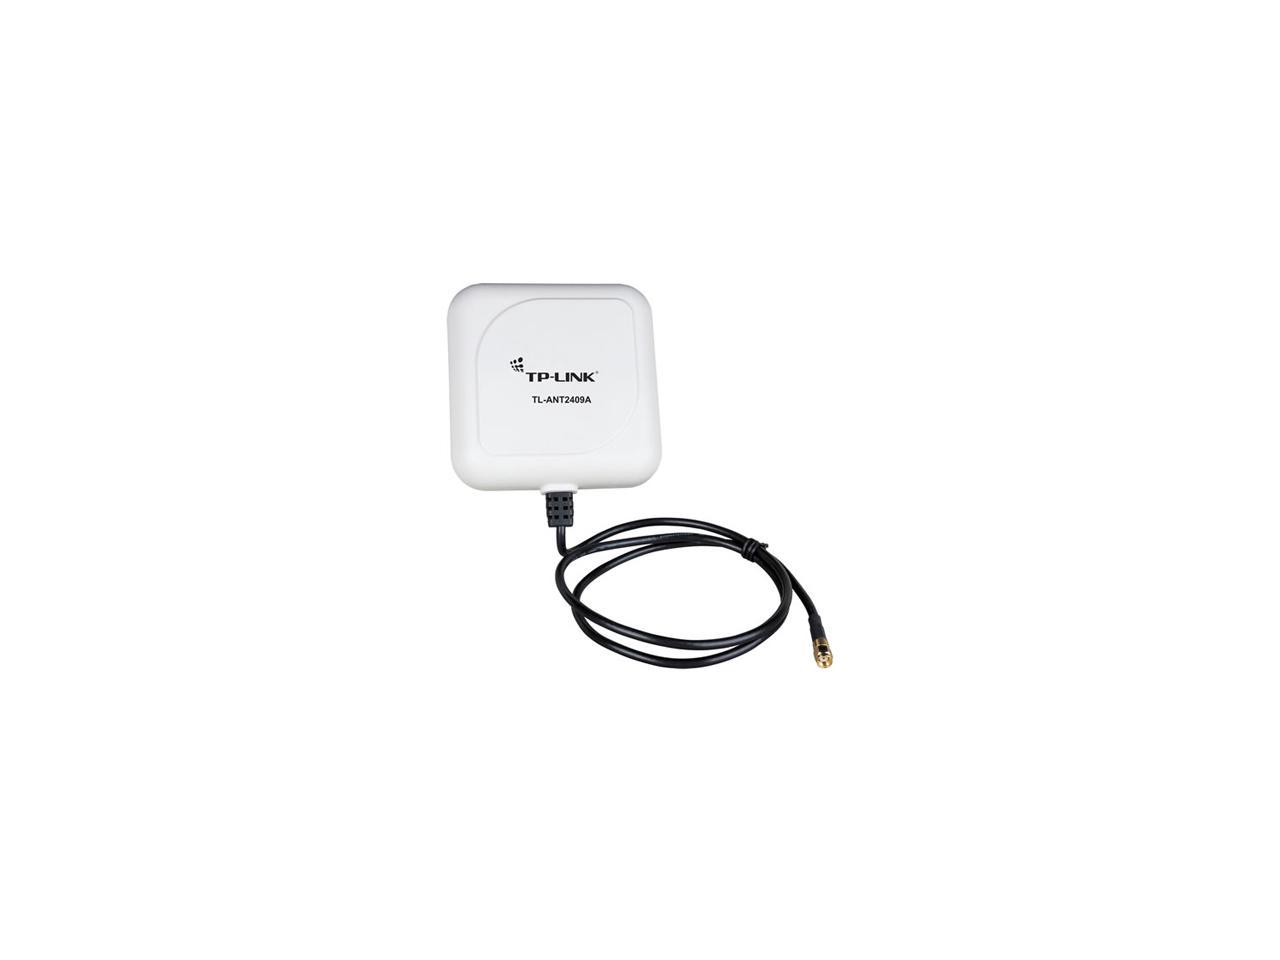 TP-Link TL-ANT2409A 2.4GHz 9dBi Directional Antenna